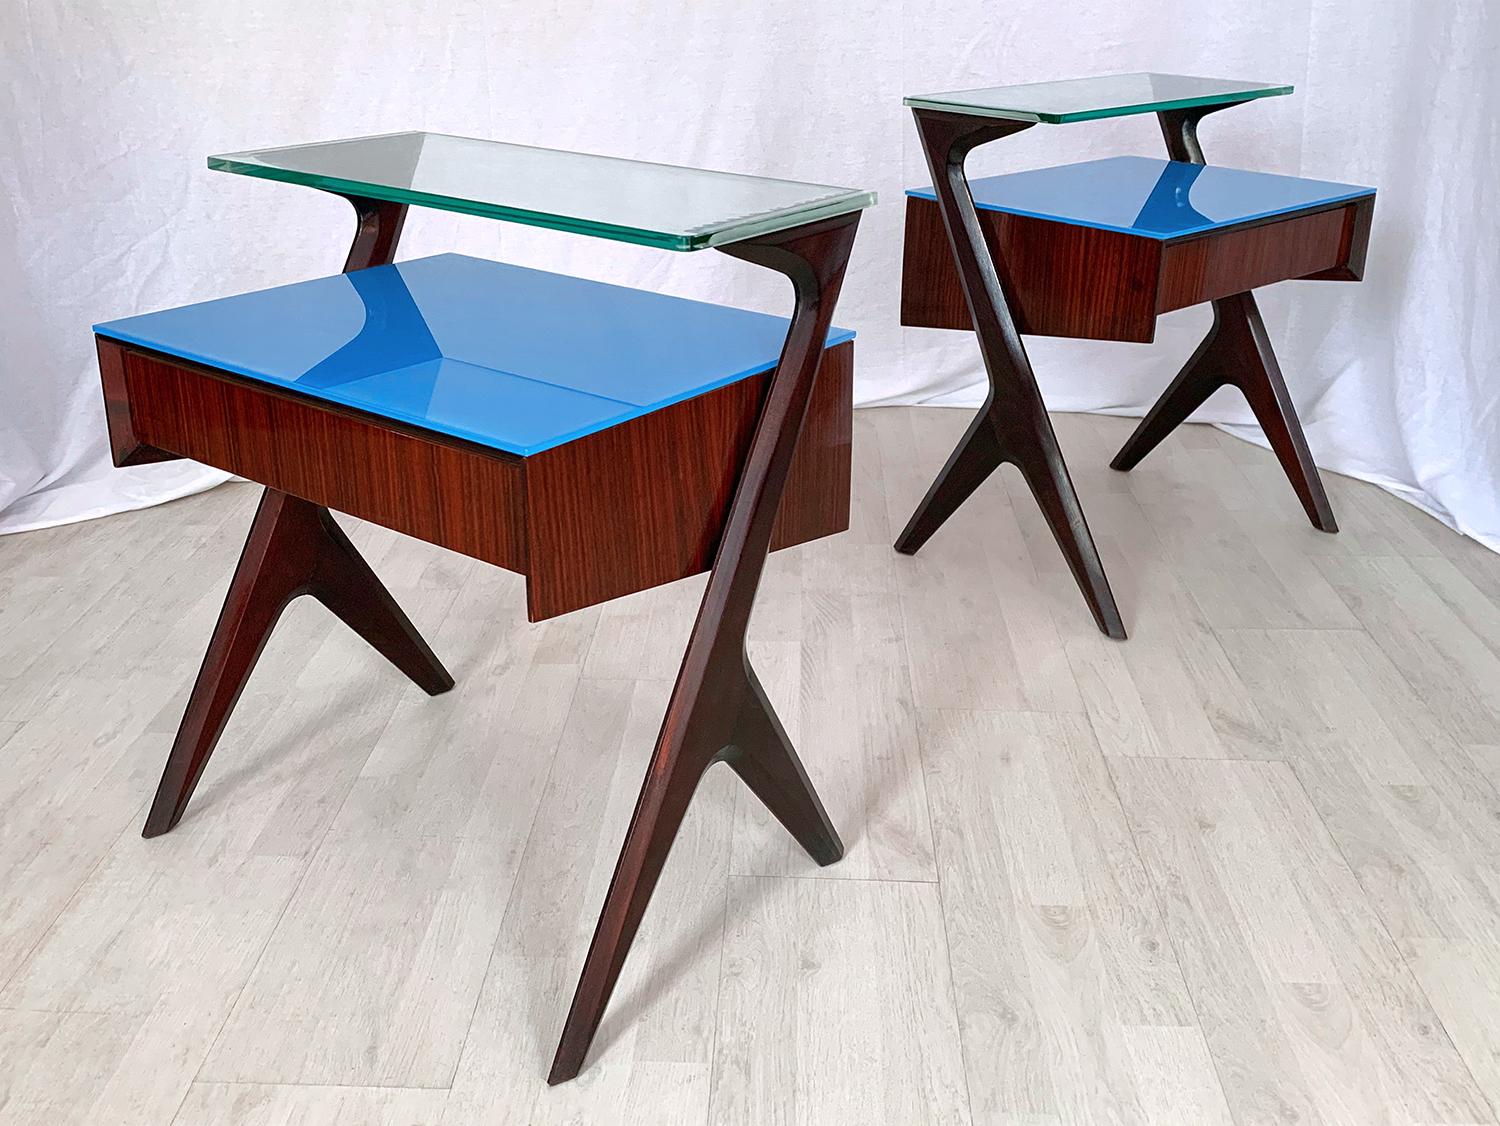 Magnificient and unique design for this pair of Italian Side Tables, carachterized by an unusual sculptural shape very well designed by Vittorio and Plinio Dassi in the 1950s.

These Nightstands are very collectable, functional and elegant, and